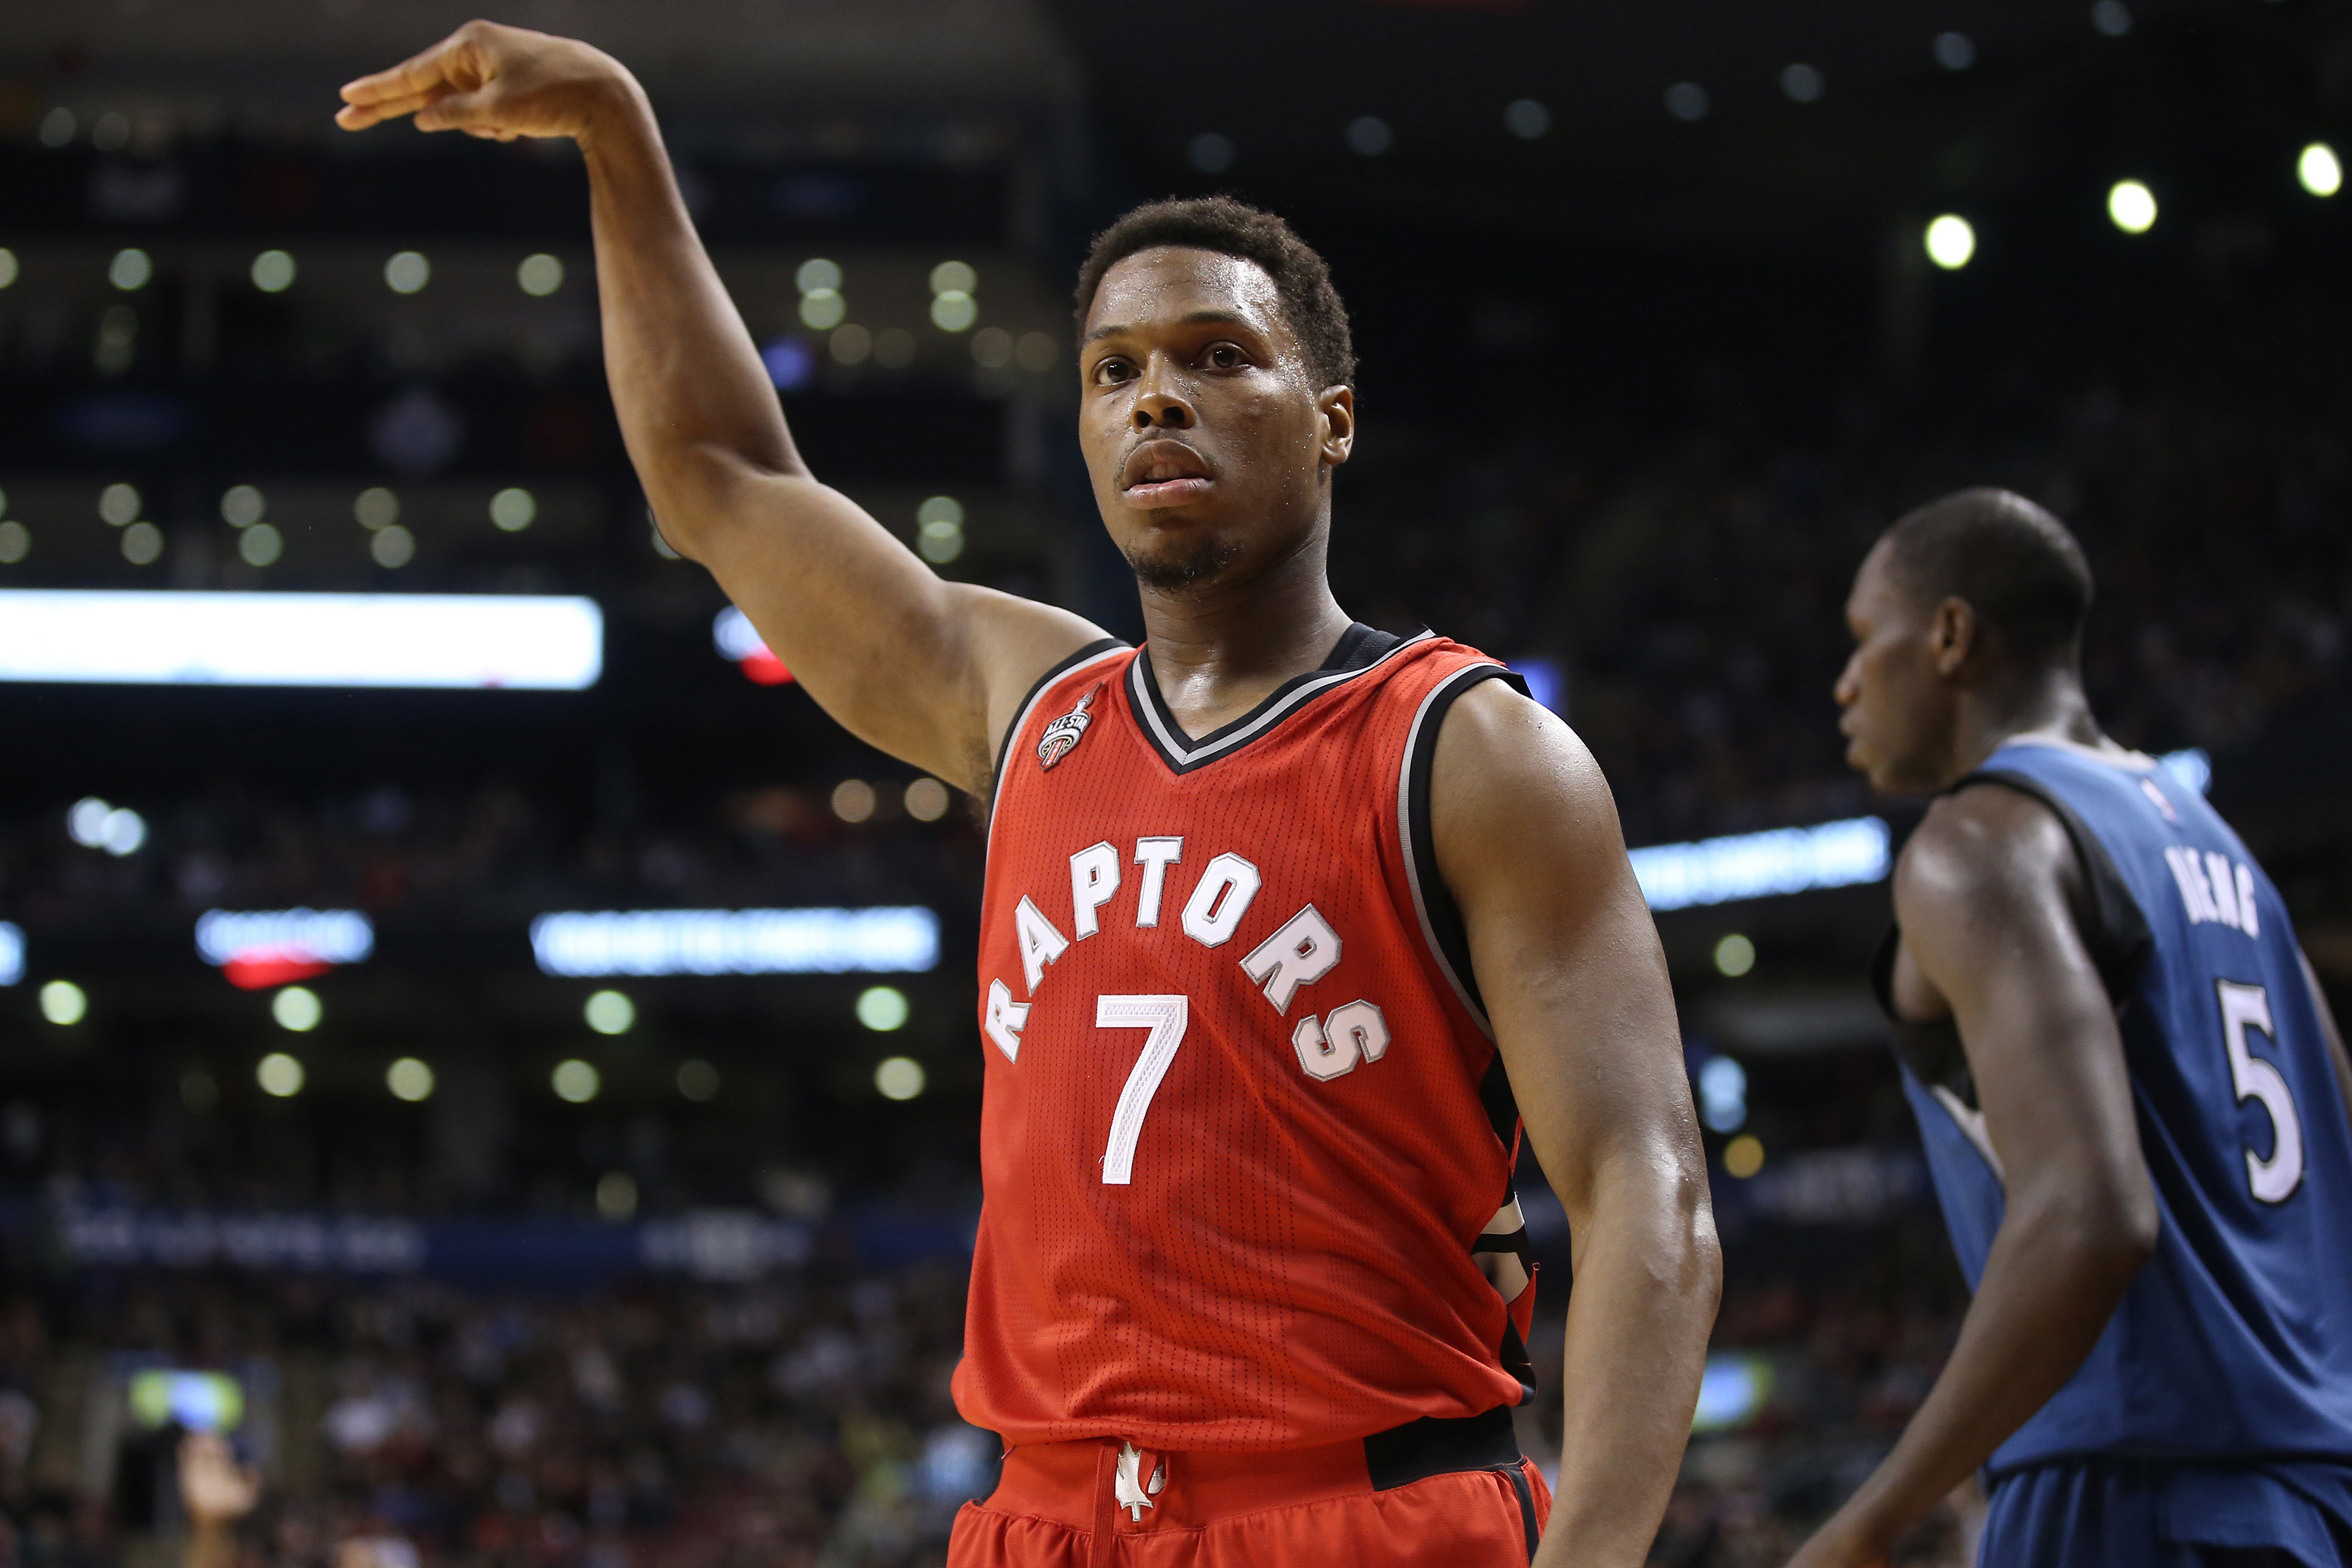 A slimmer Kyle Lowry showing glimpses of improvement this preseason